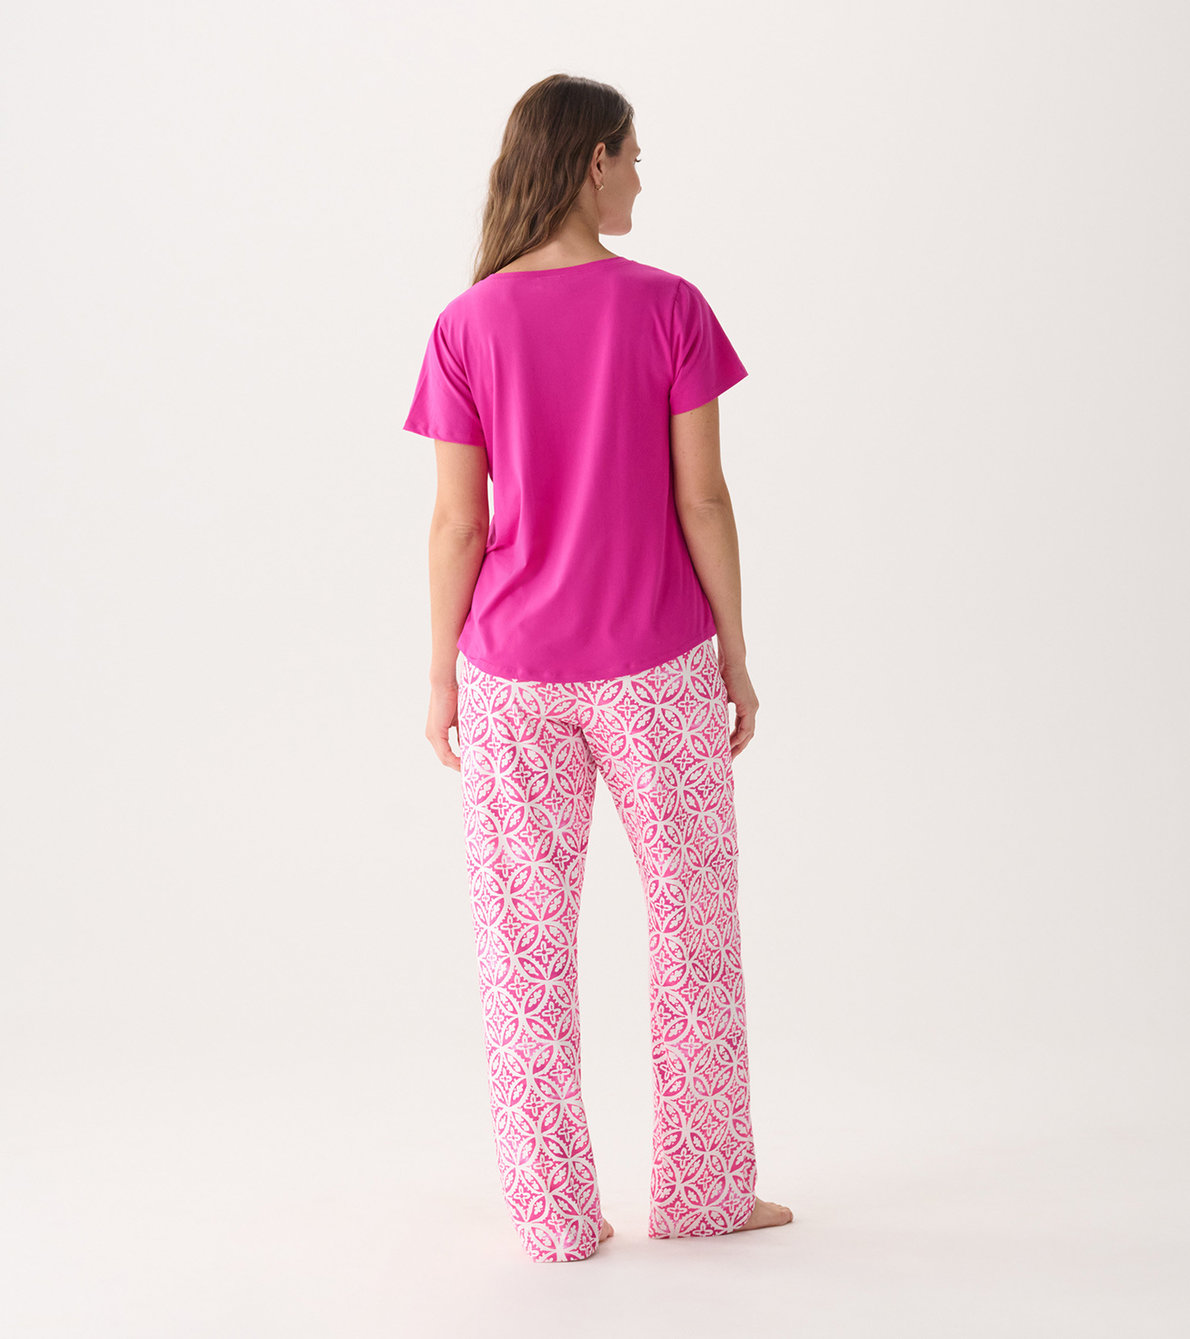 View larger image of Capelton Road Women's Pink Lotus T-Shirt and Pants